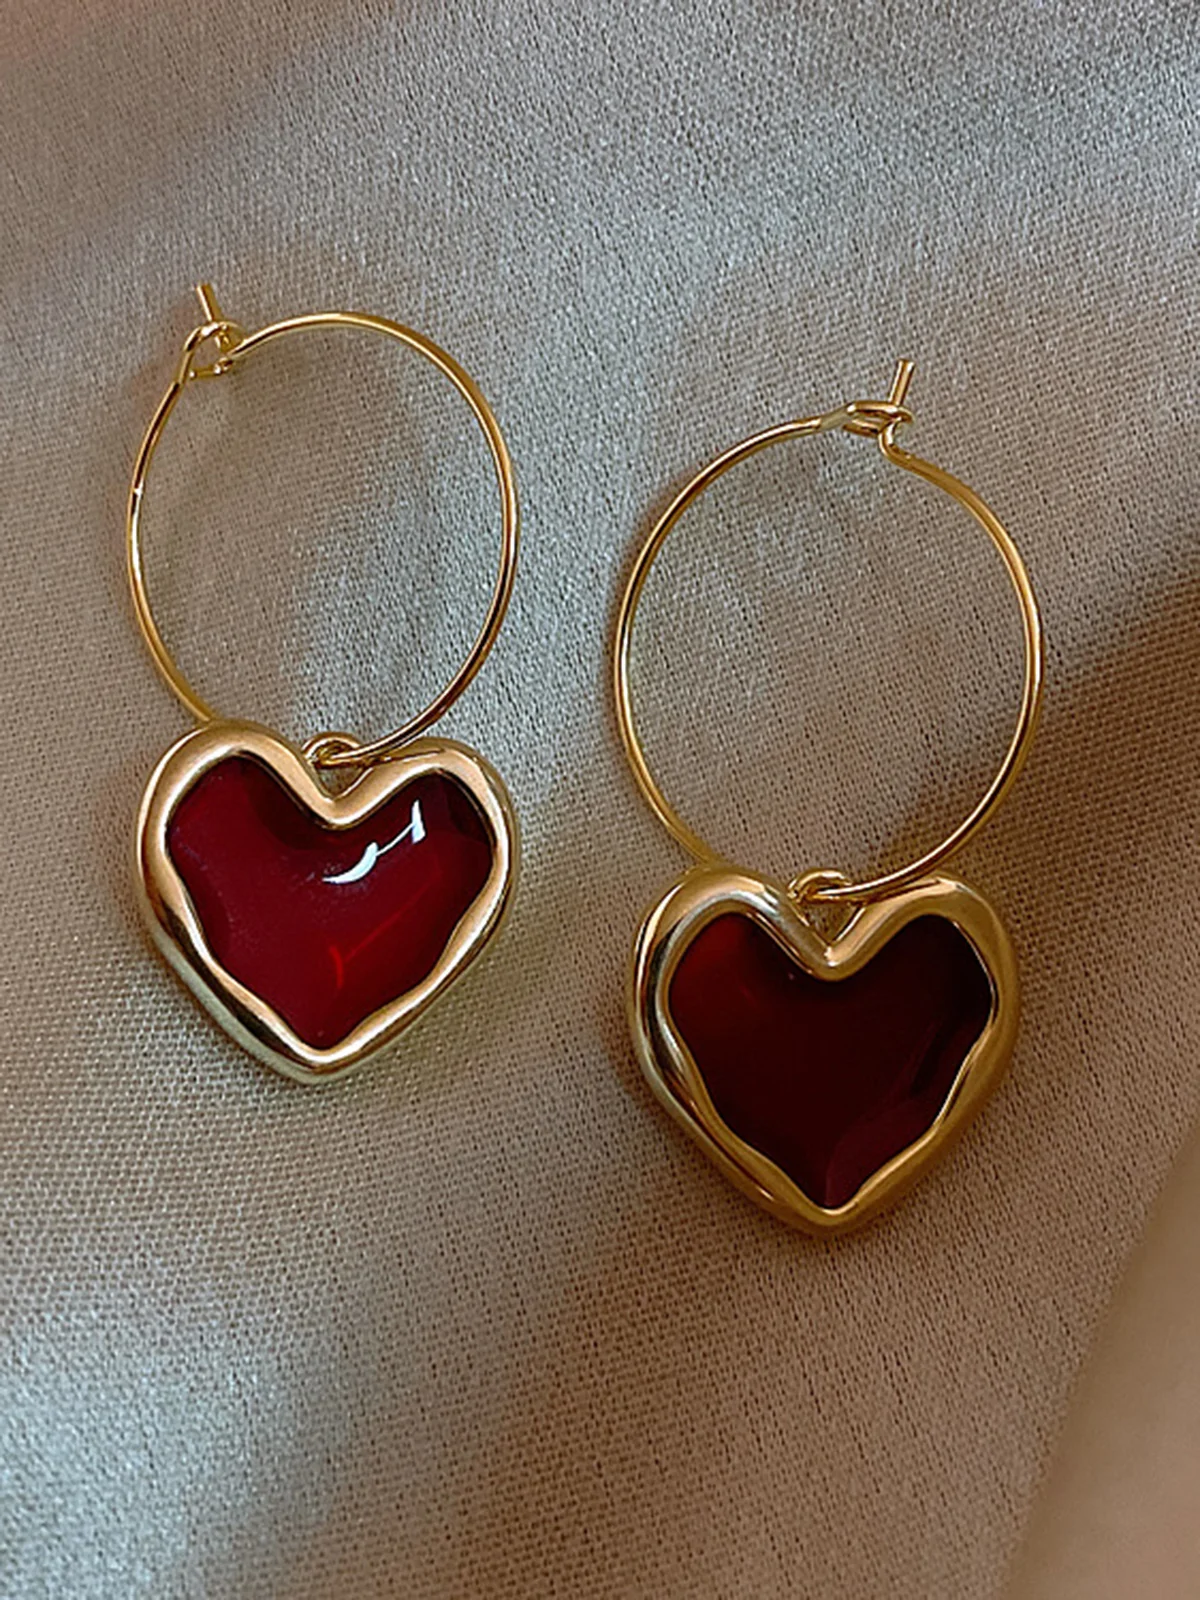 Love Circle Empty Earrings Gifts Heart Shaped Valentine's Day Gifts